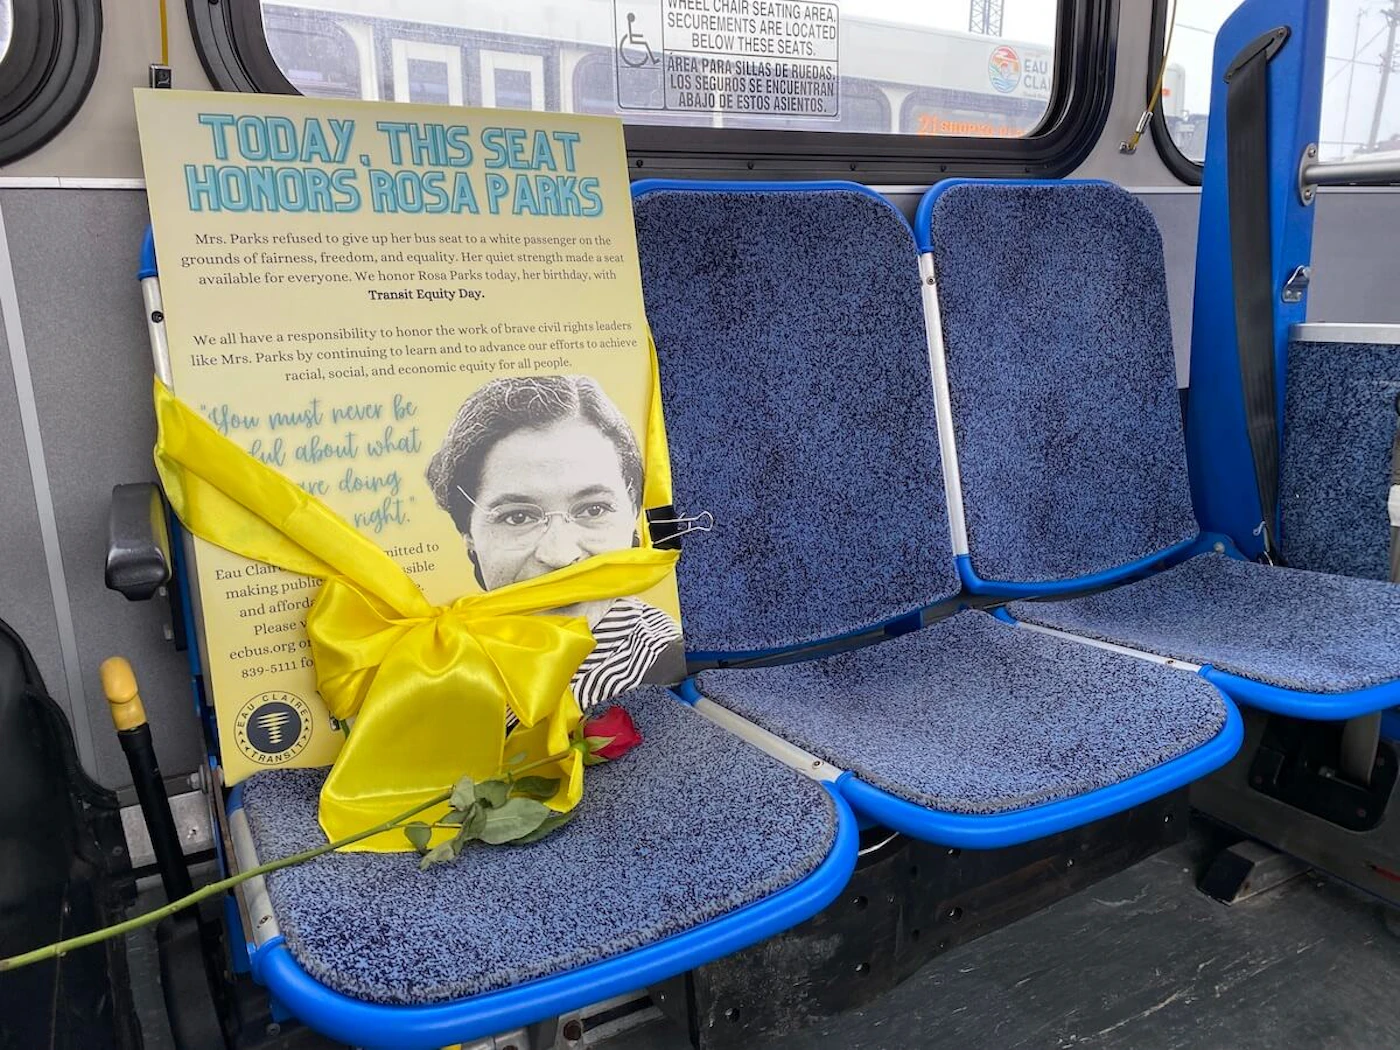 An Eau Claire bus seat "reserved" for Rosa Parks in honor of Transit Equity Day. (Photo by Julian Emerson)